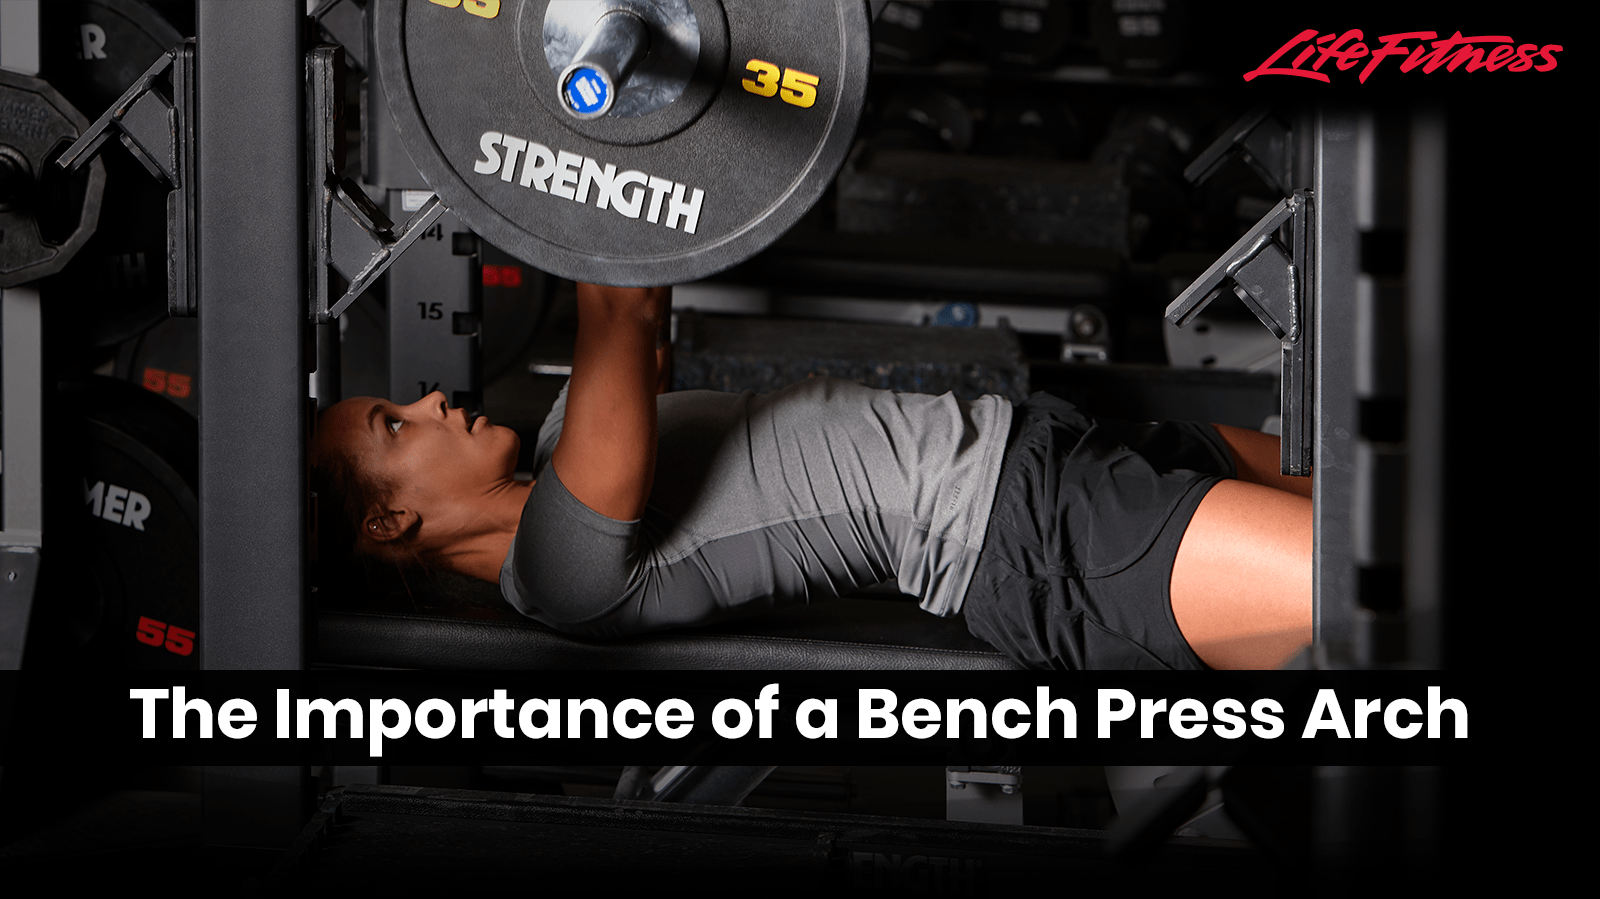 The Importance of a Bench Press Arch